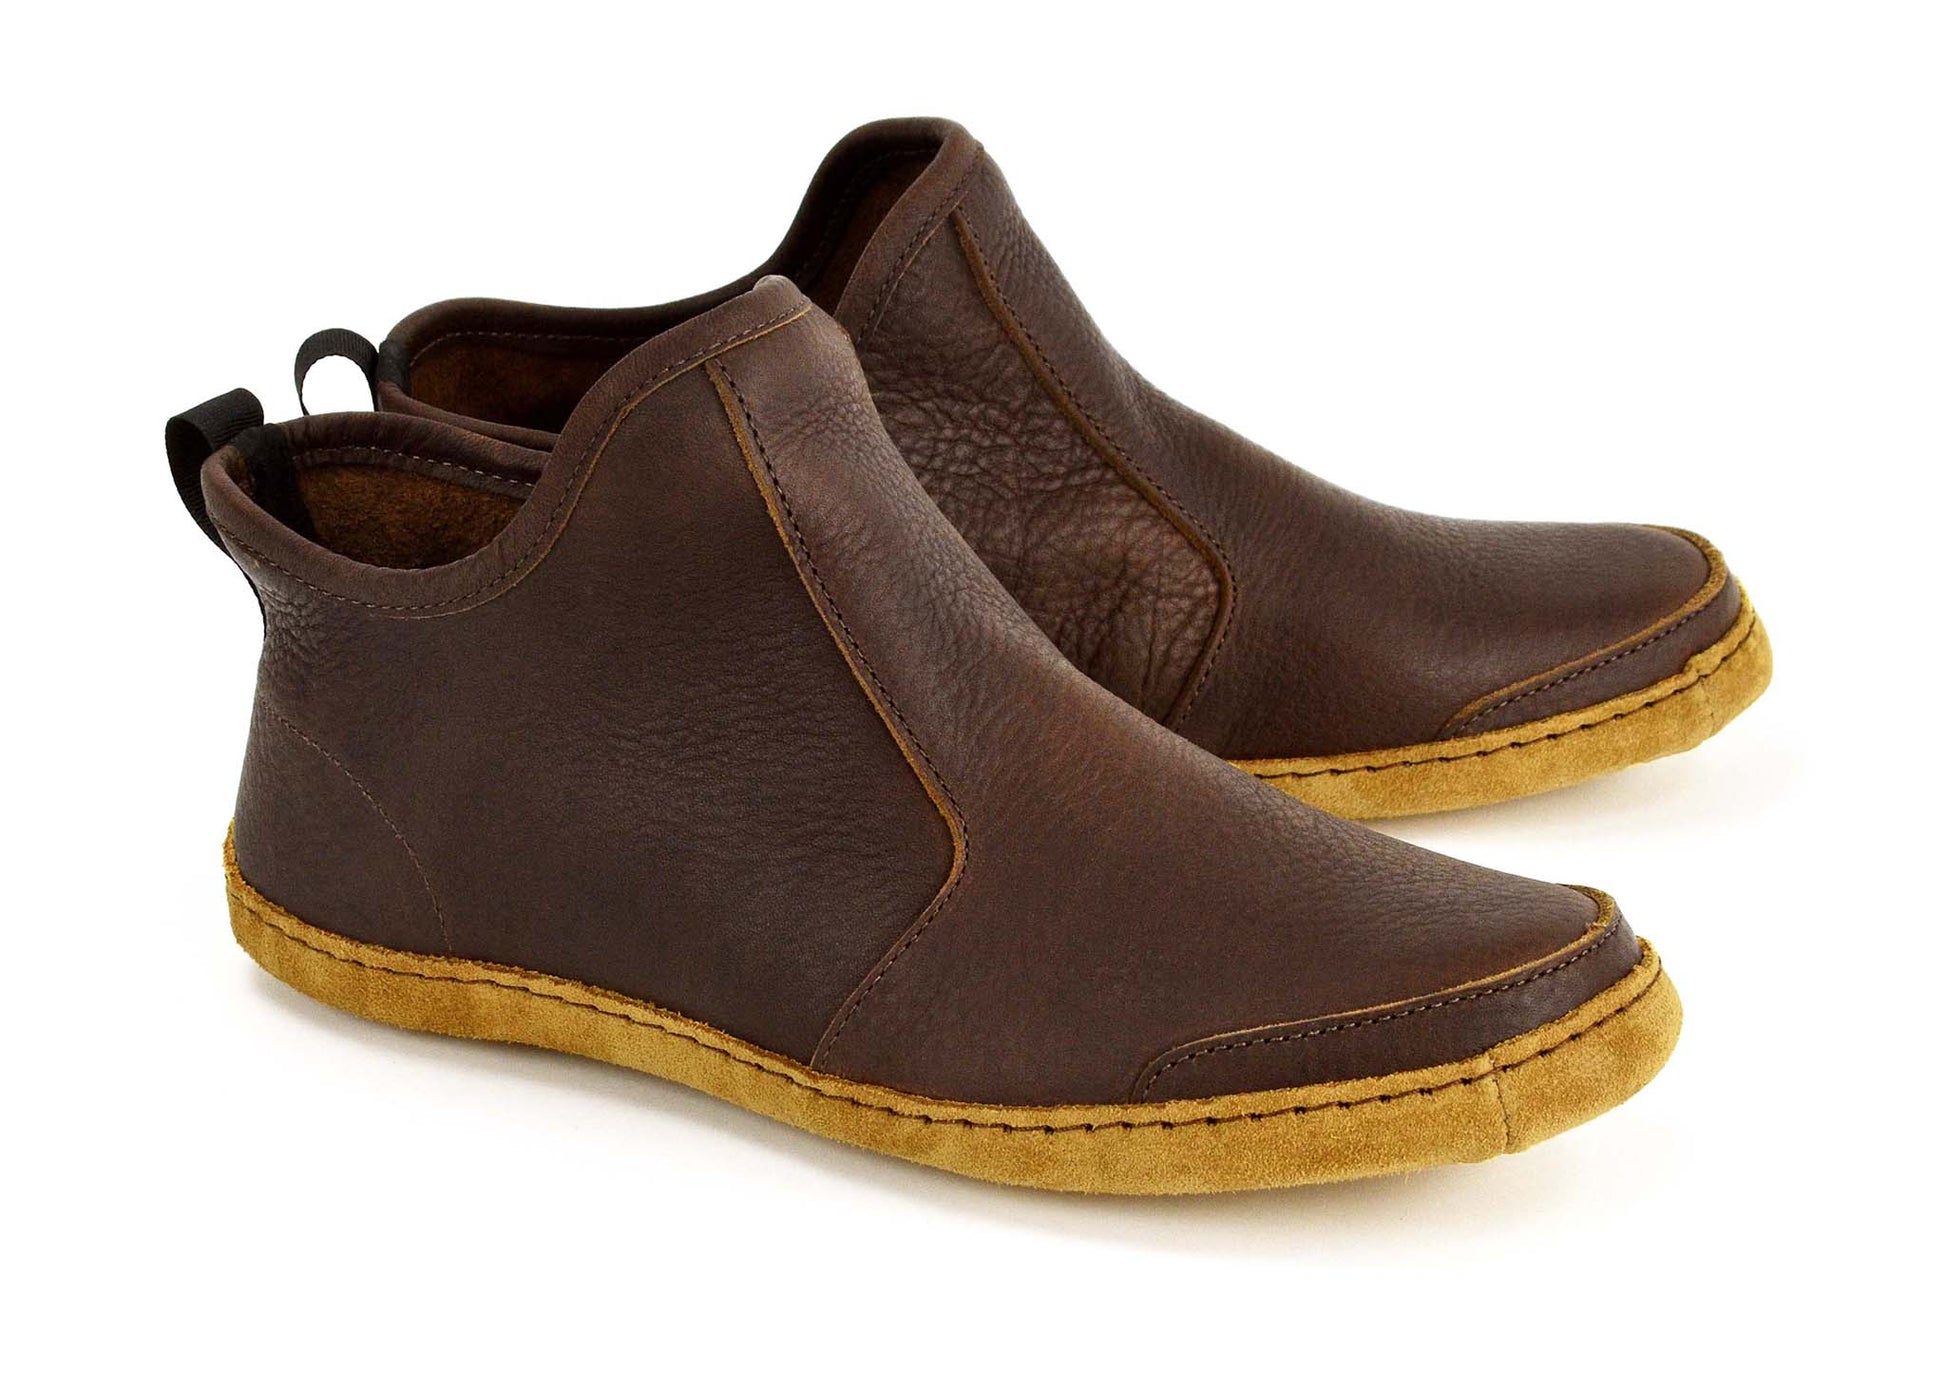 Vermont House Shoes - Hi-Top - Chocolate